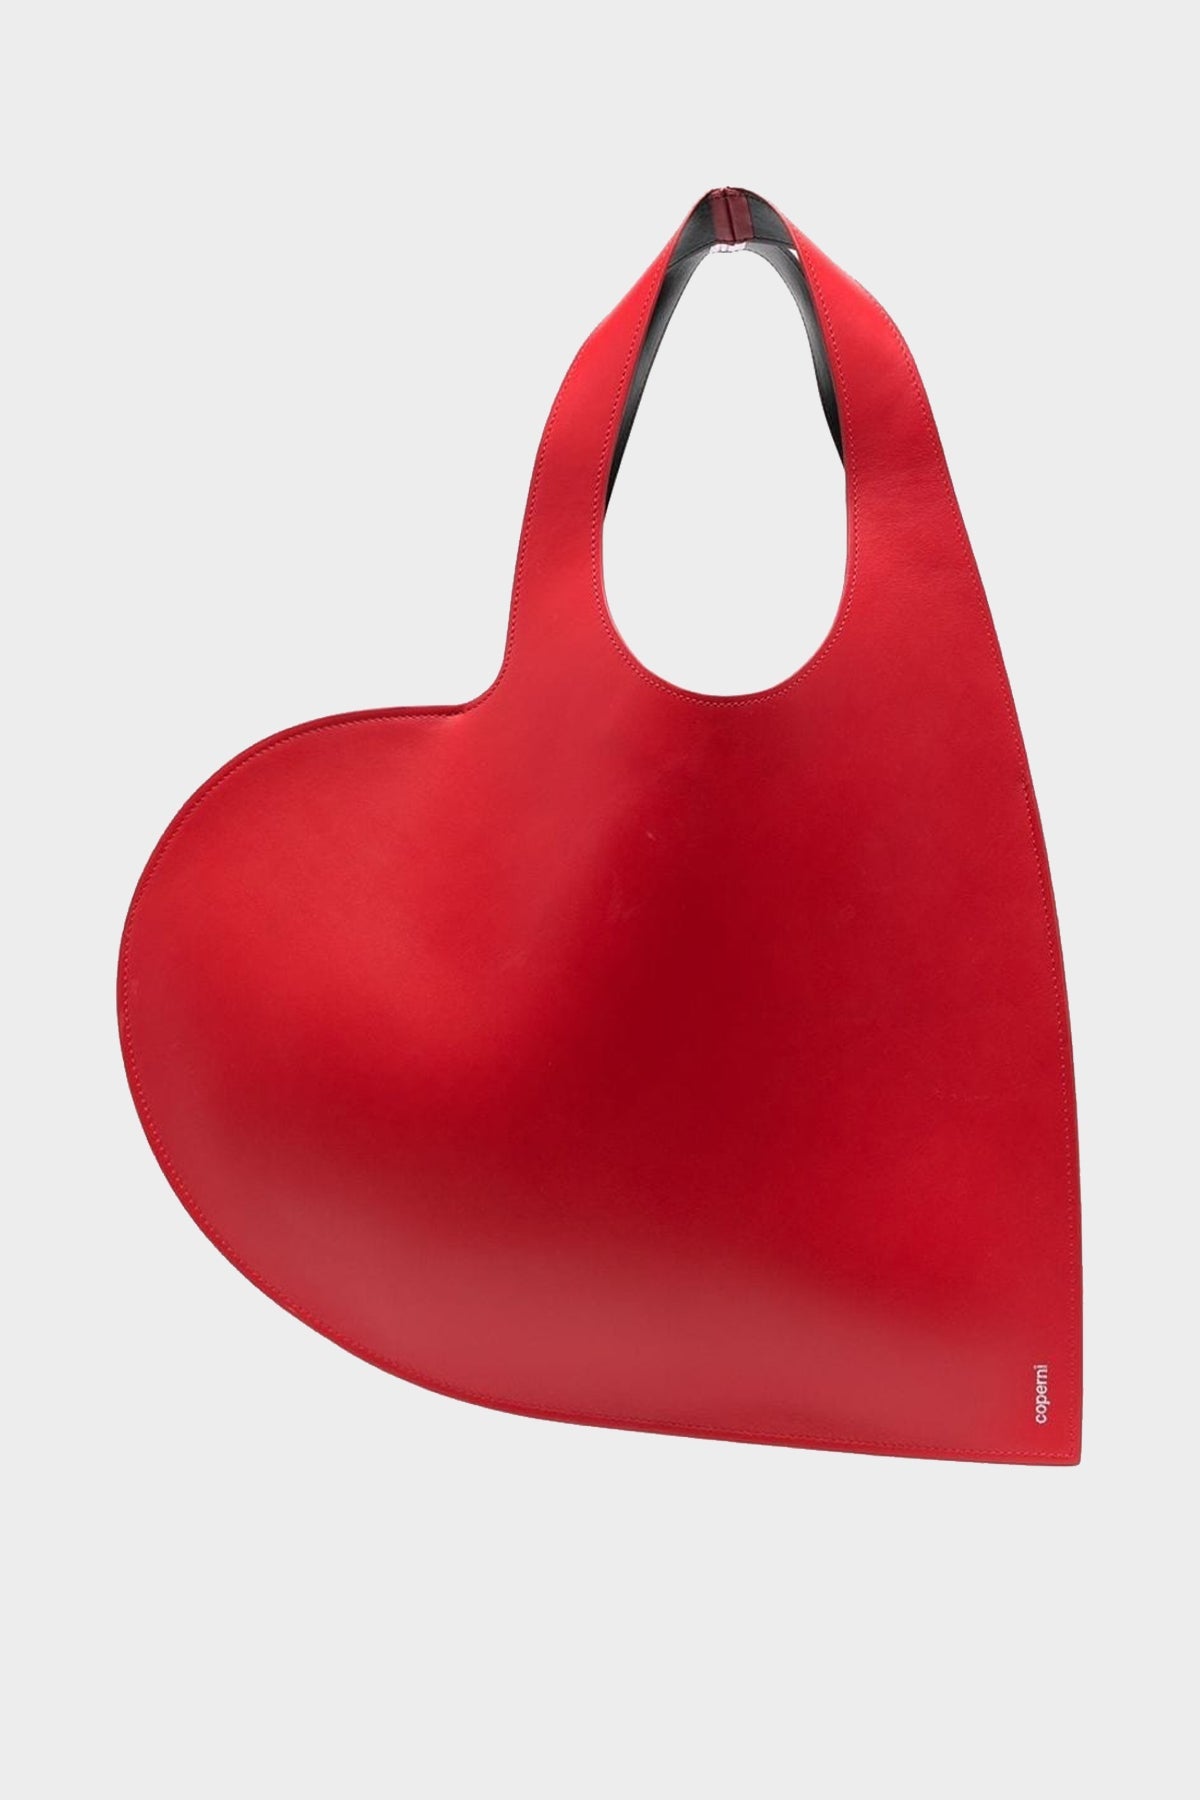 Heart Tote Bag in Bright Red - shop-olivia.com